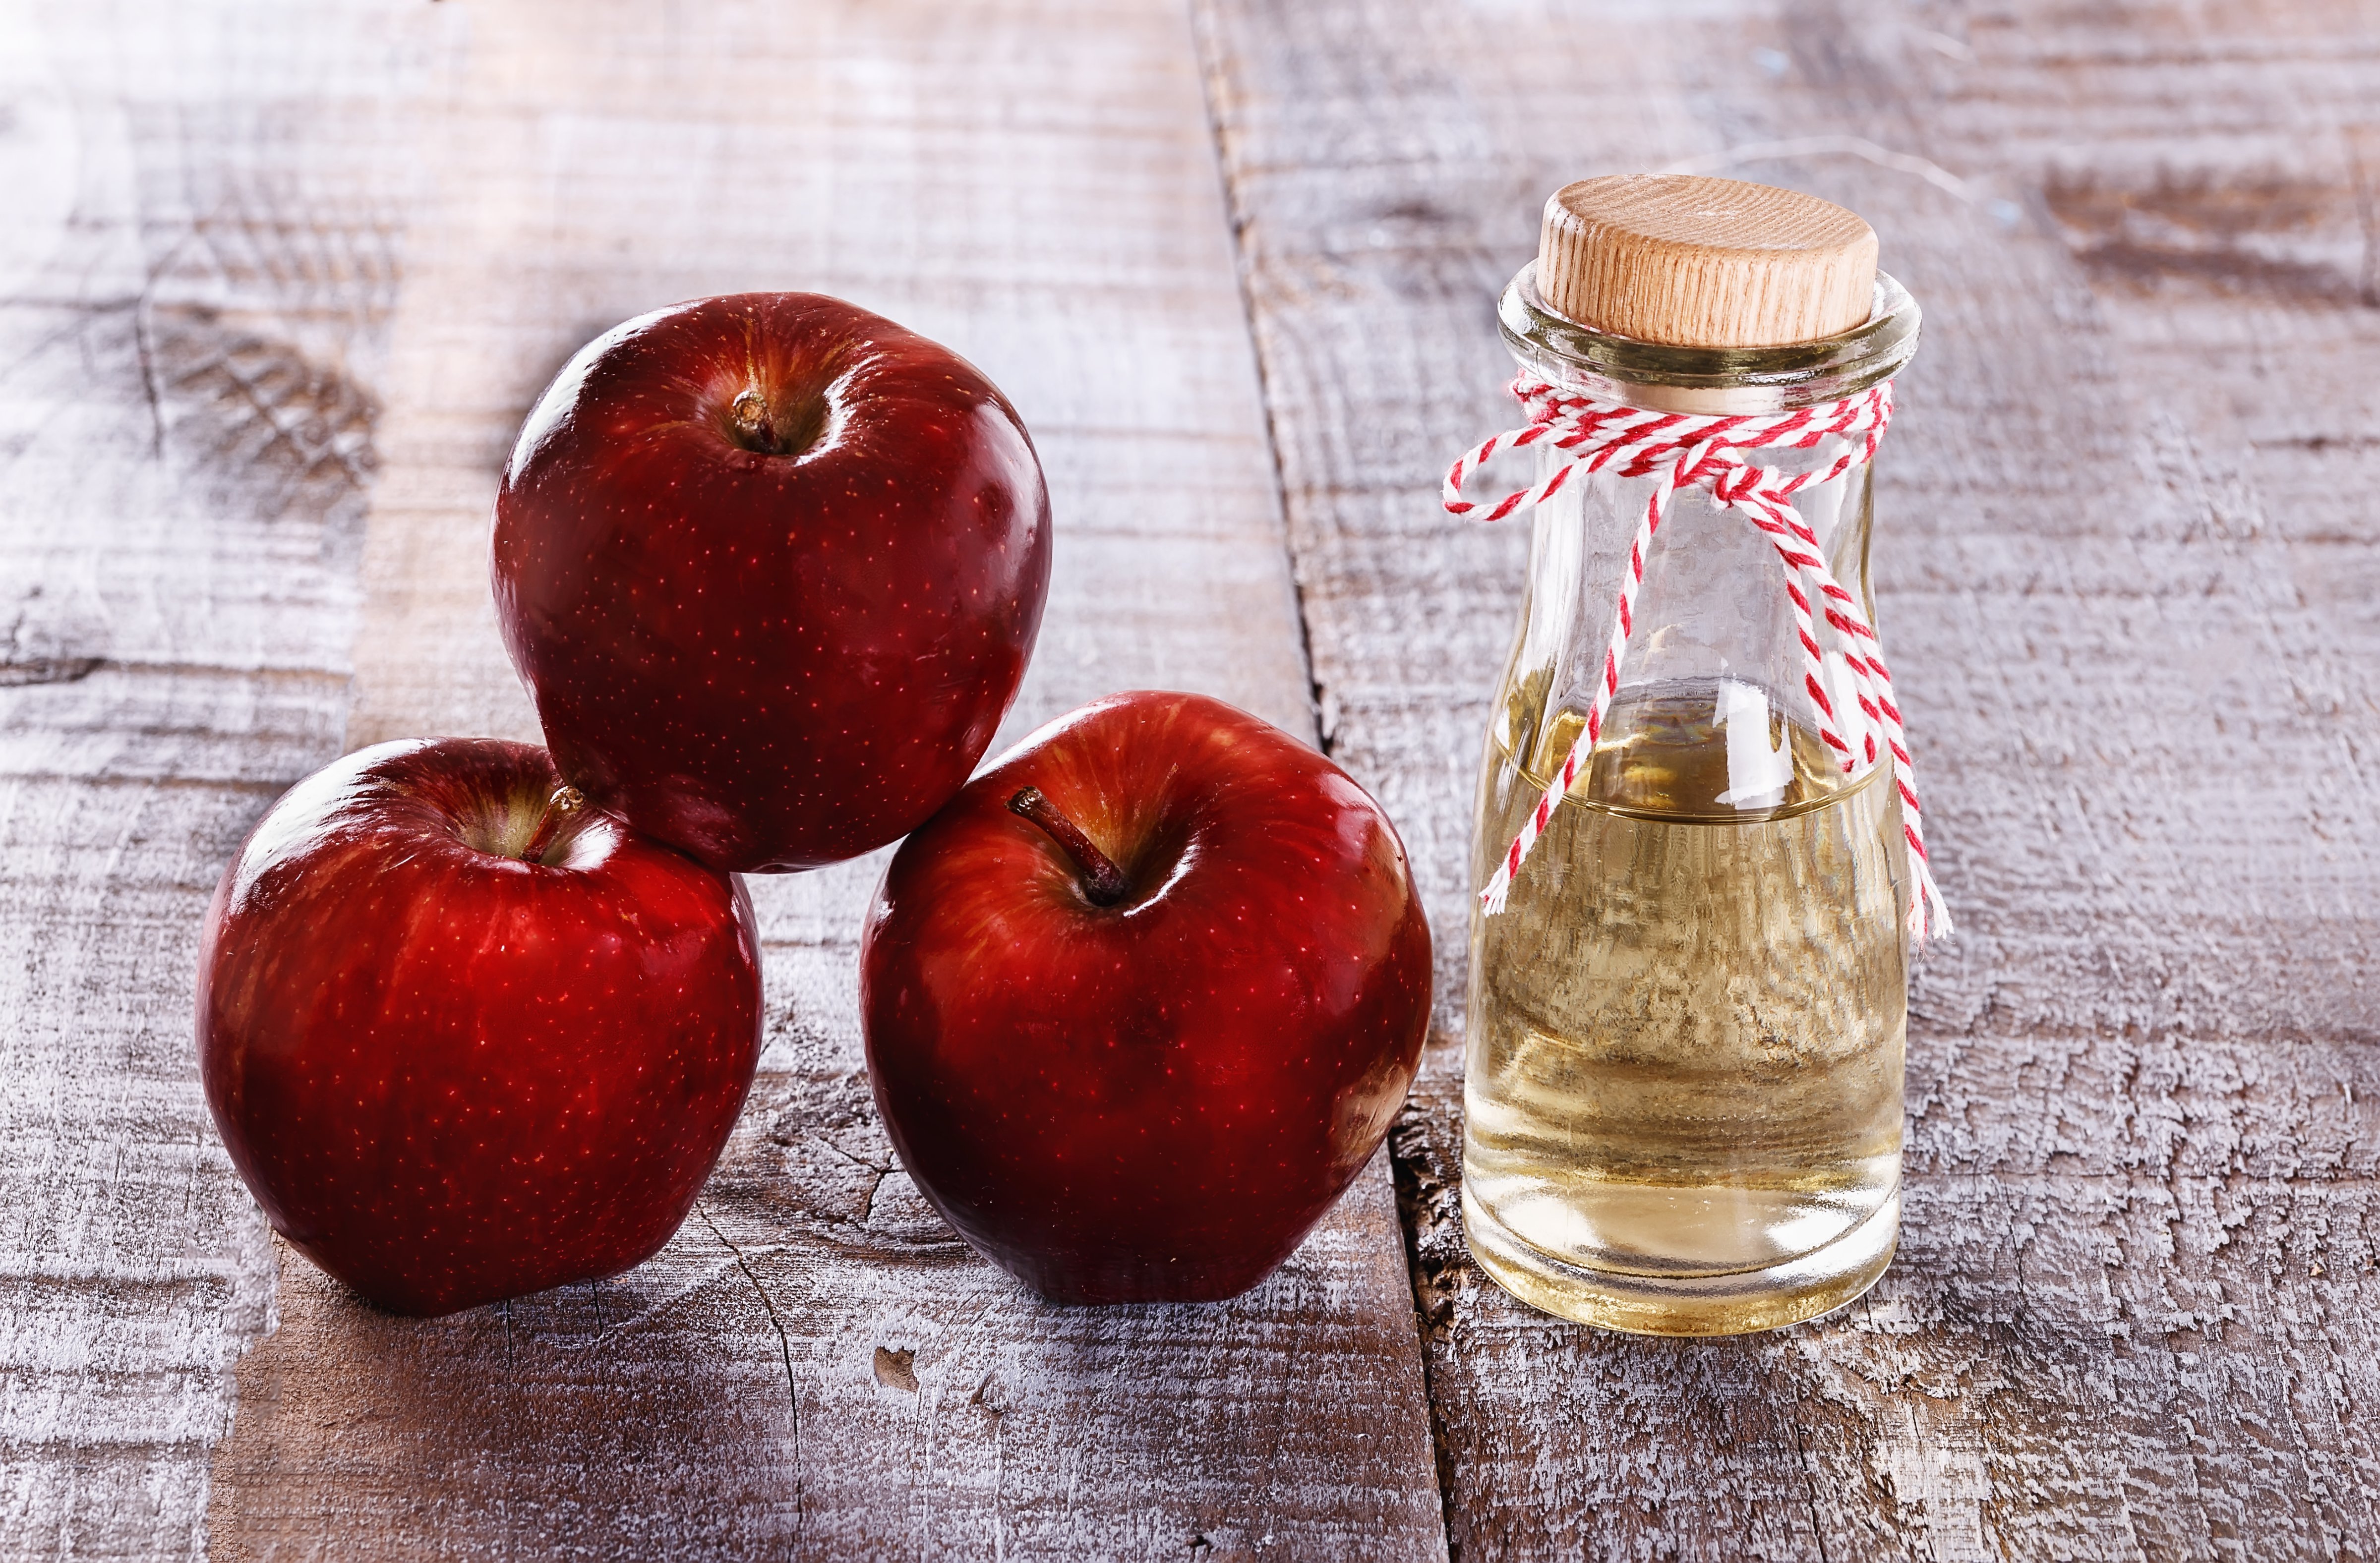 Apple cider vinegar and apples over white wooden background (Getty Images)